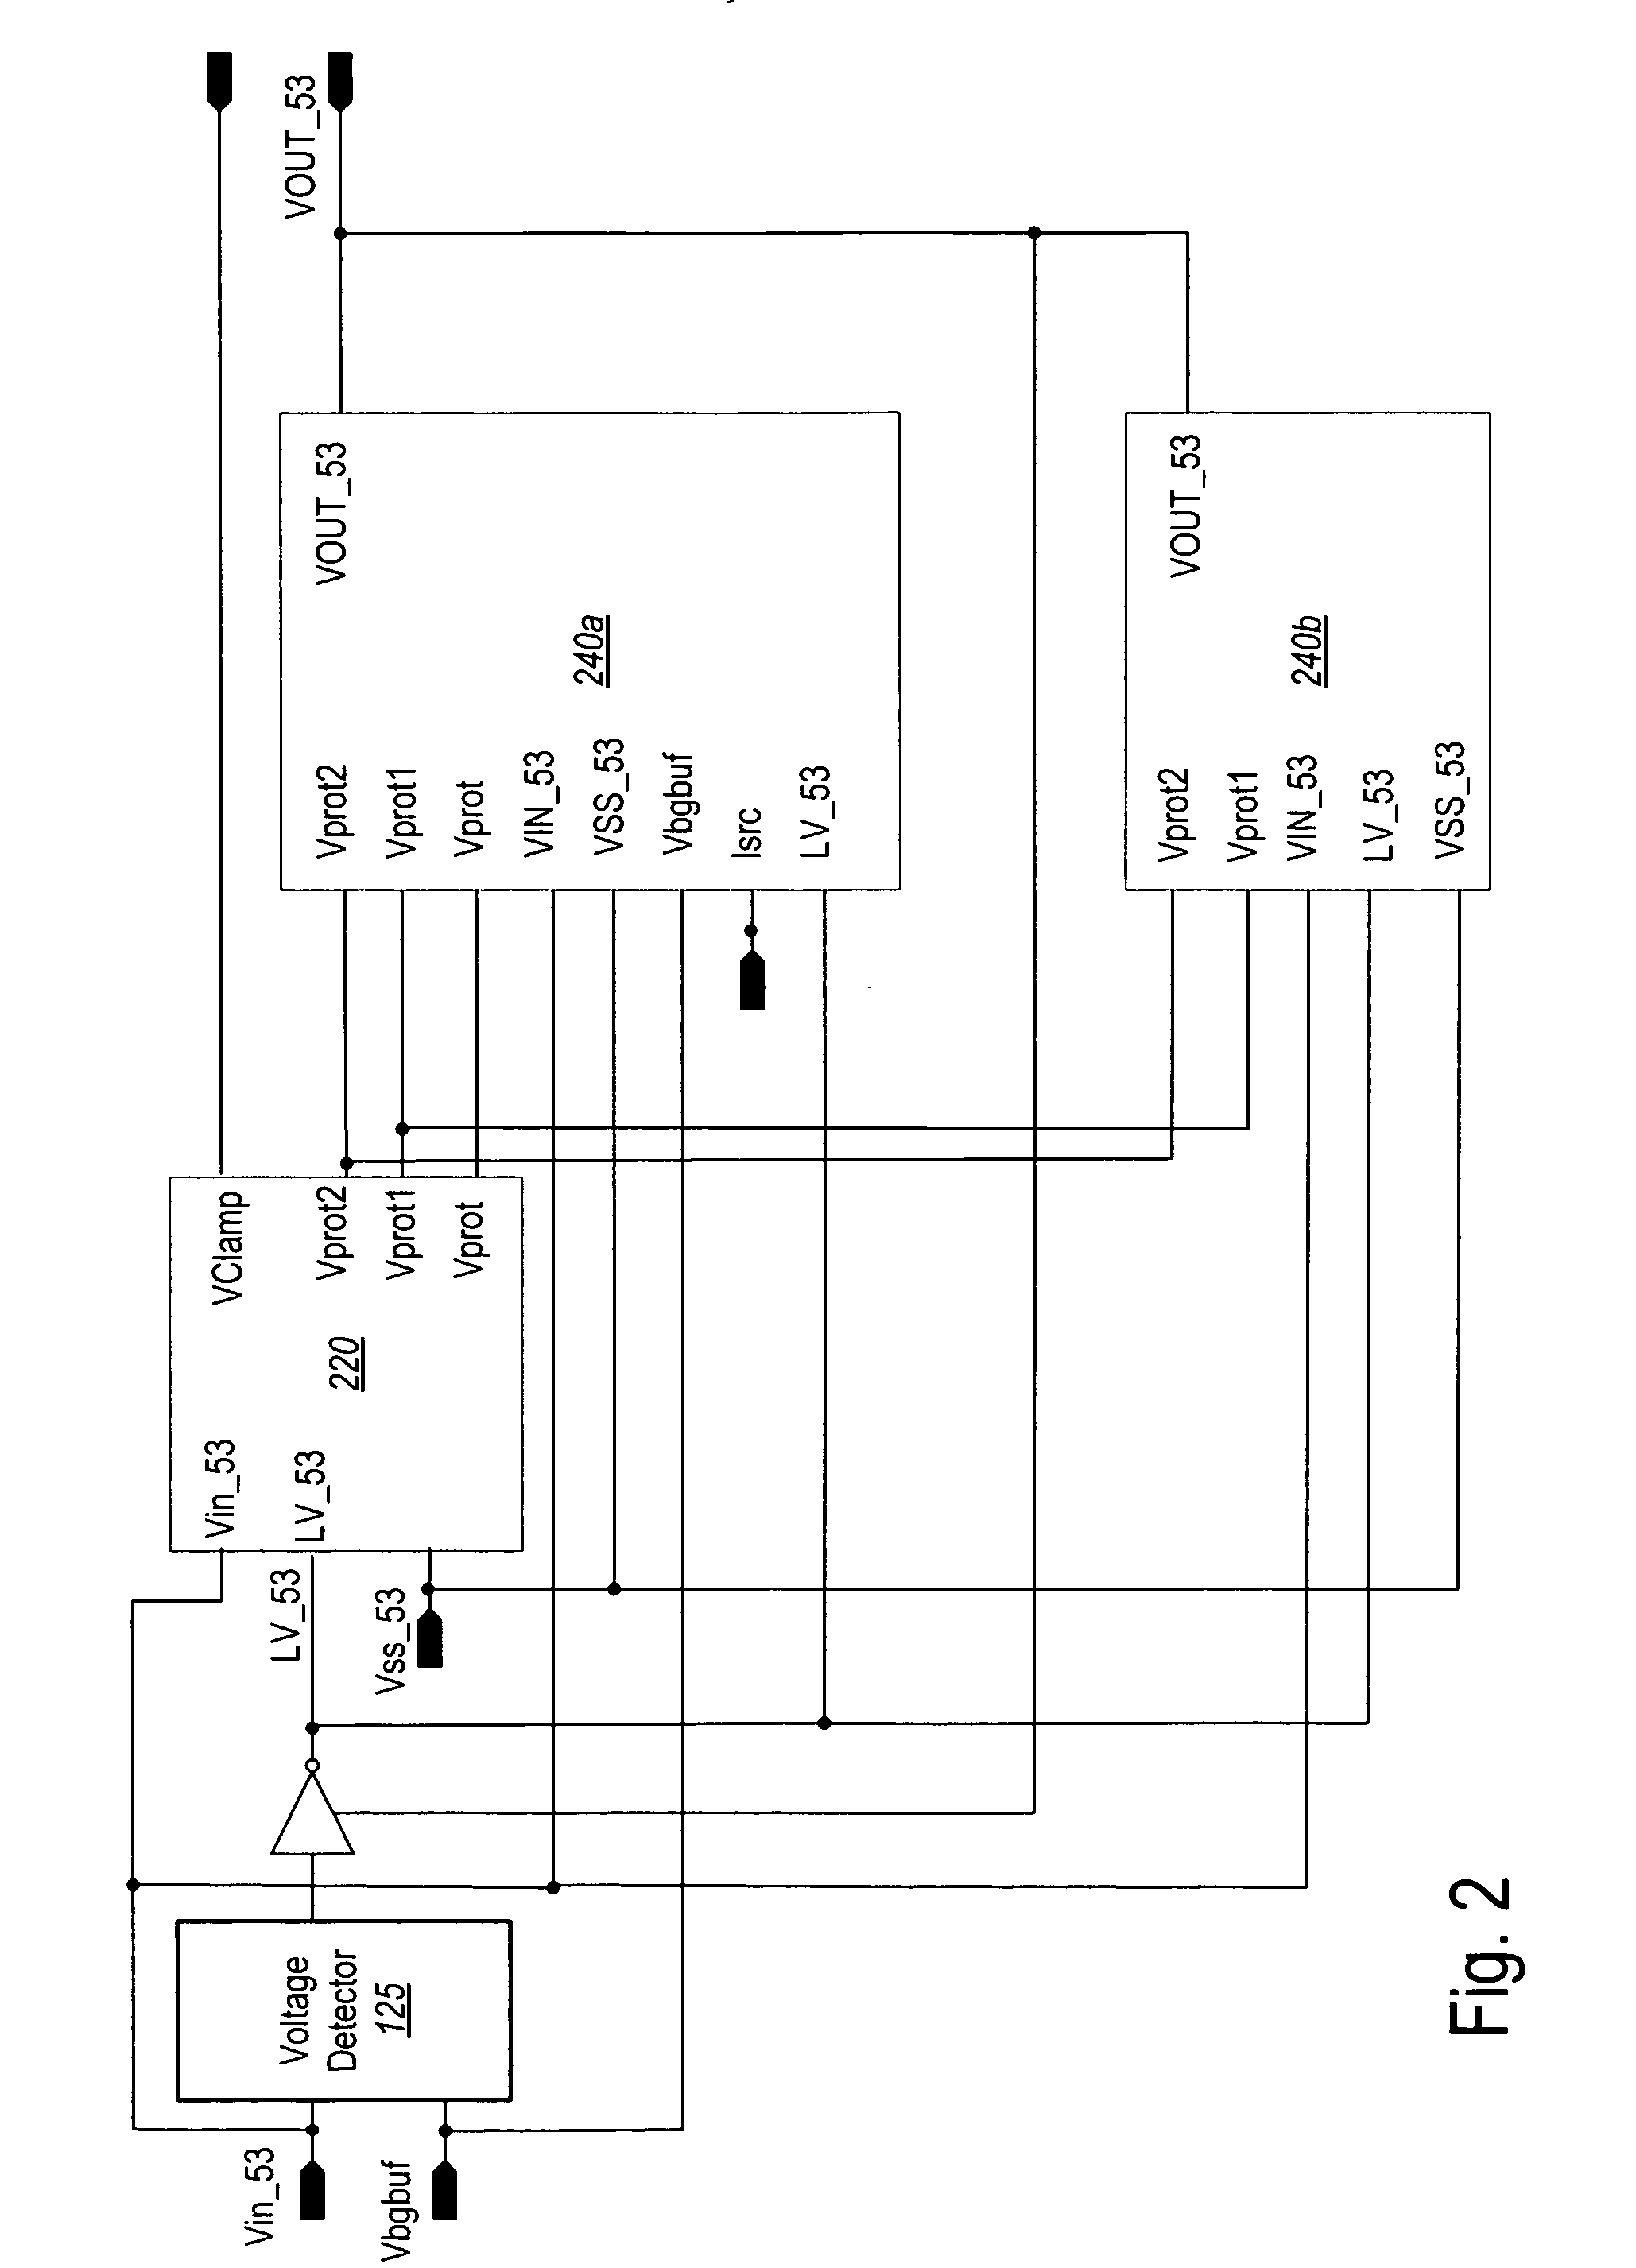 Voltage regulator with bypass mode